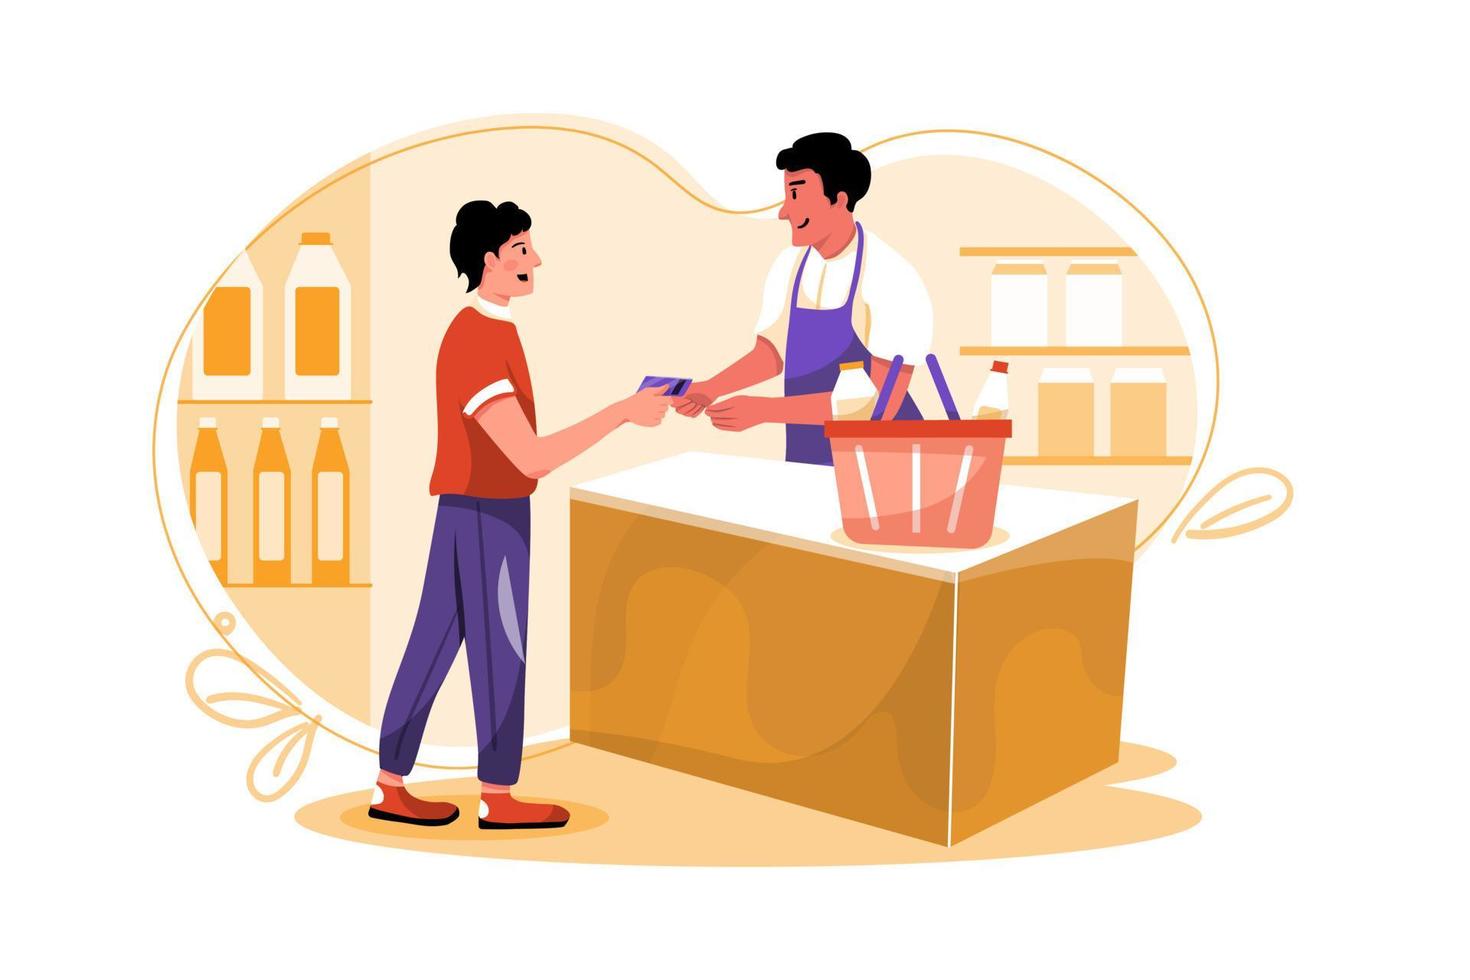 Man paying for the purchase by credit card Illustration concept. Flat illustration isolated on white background. vector